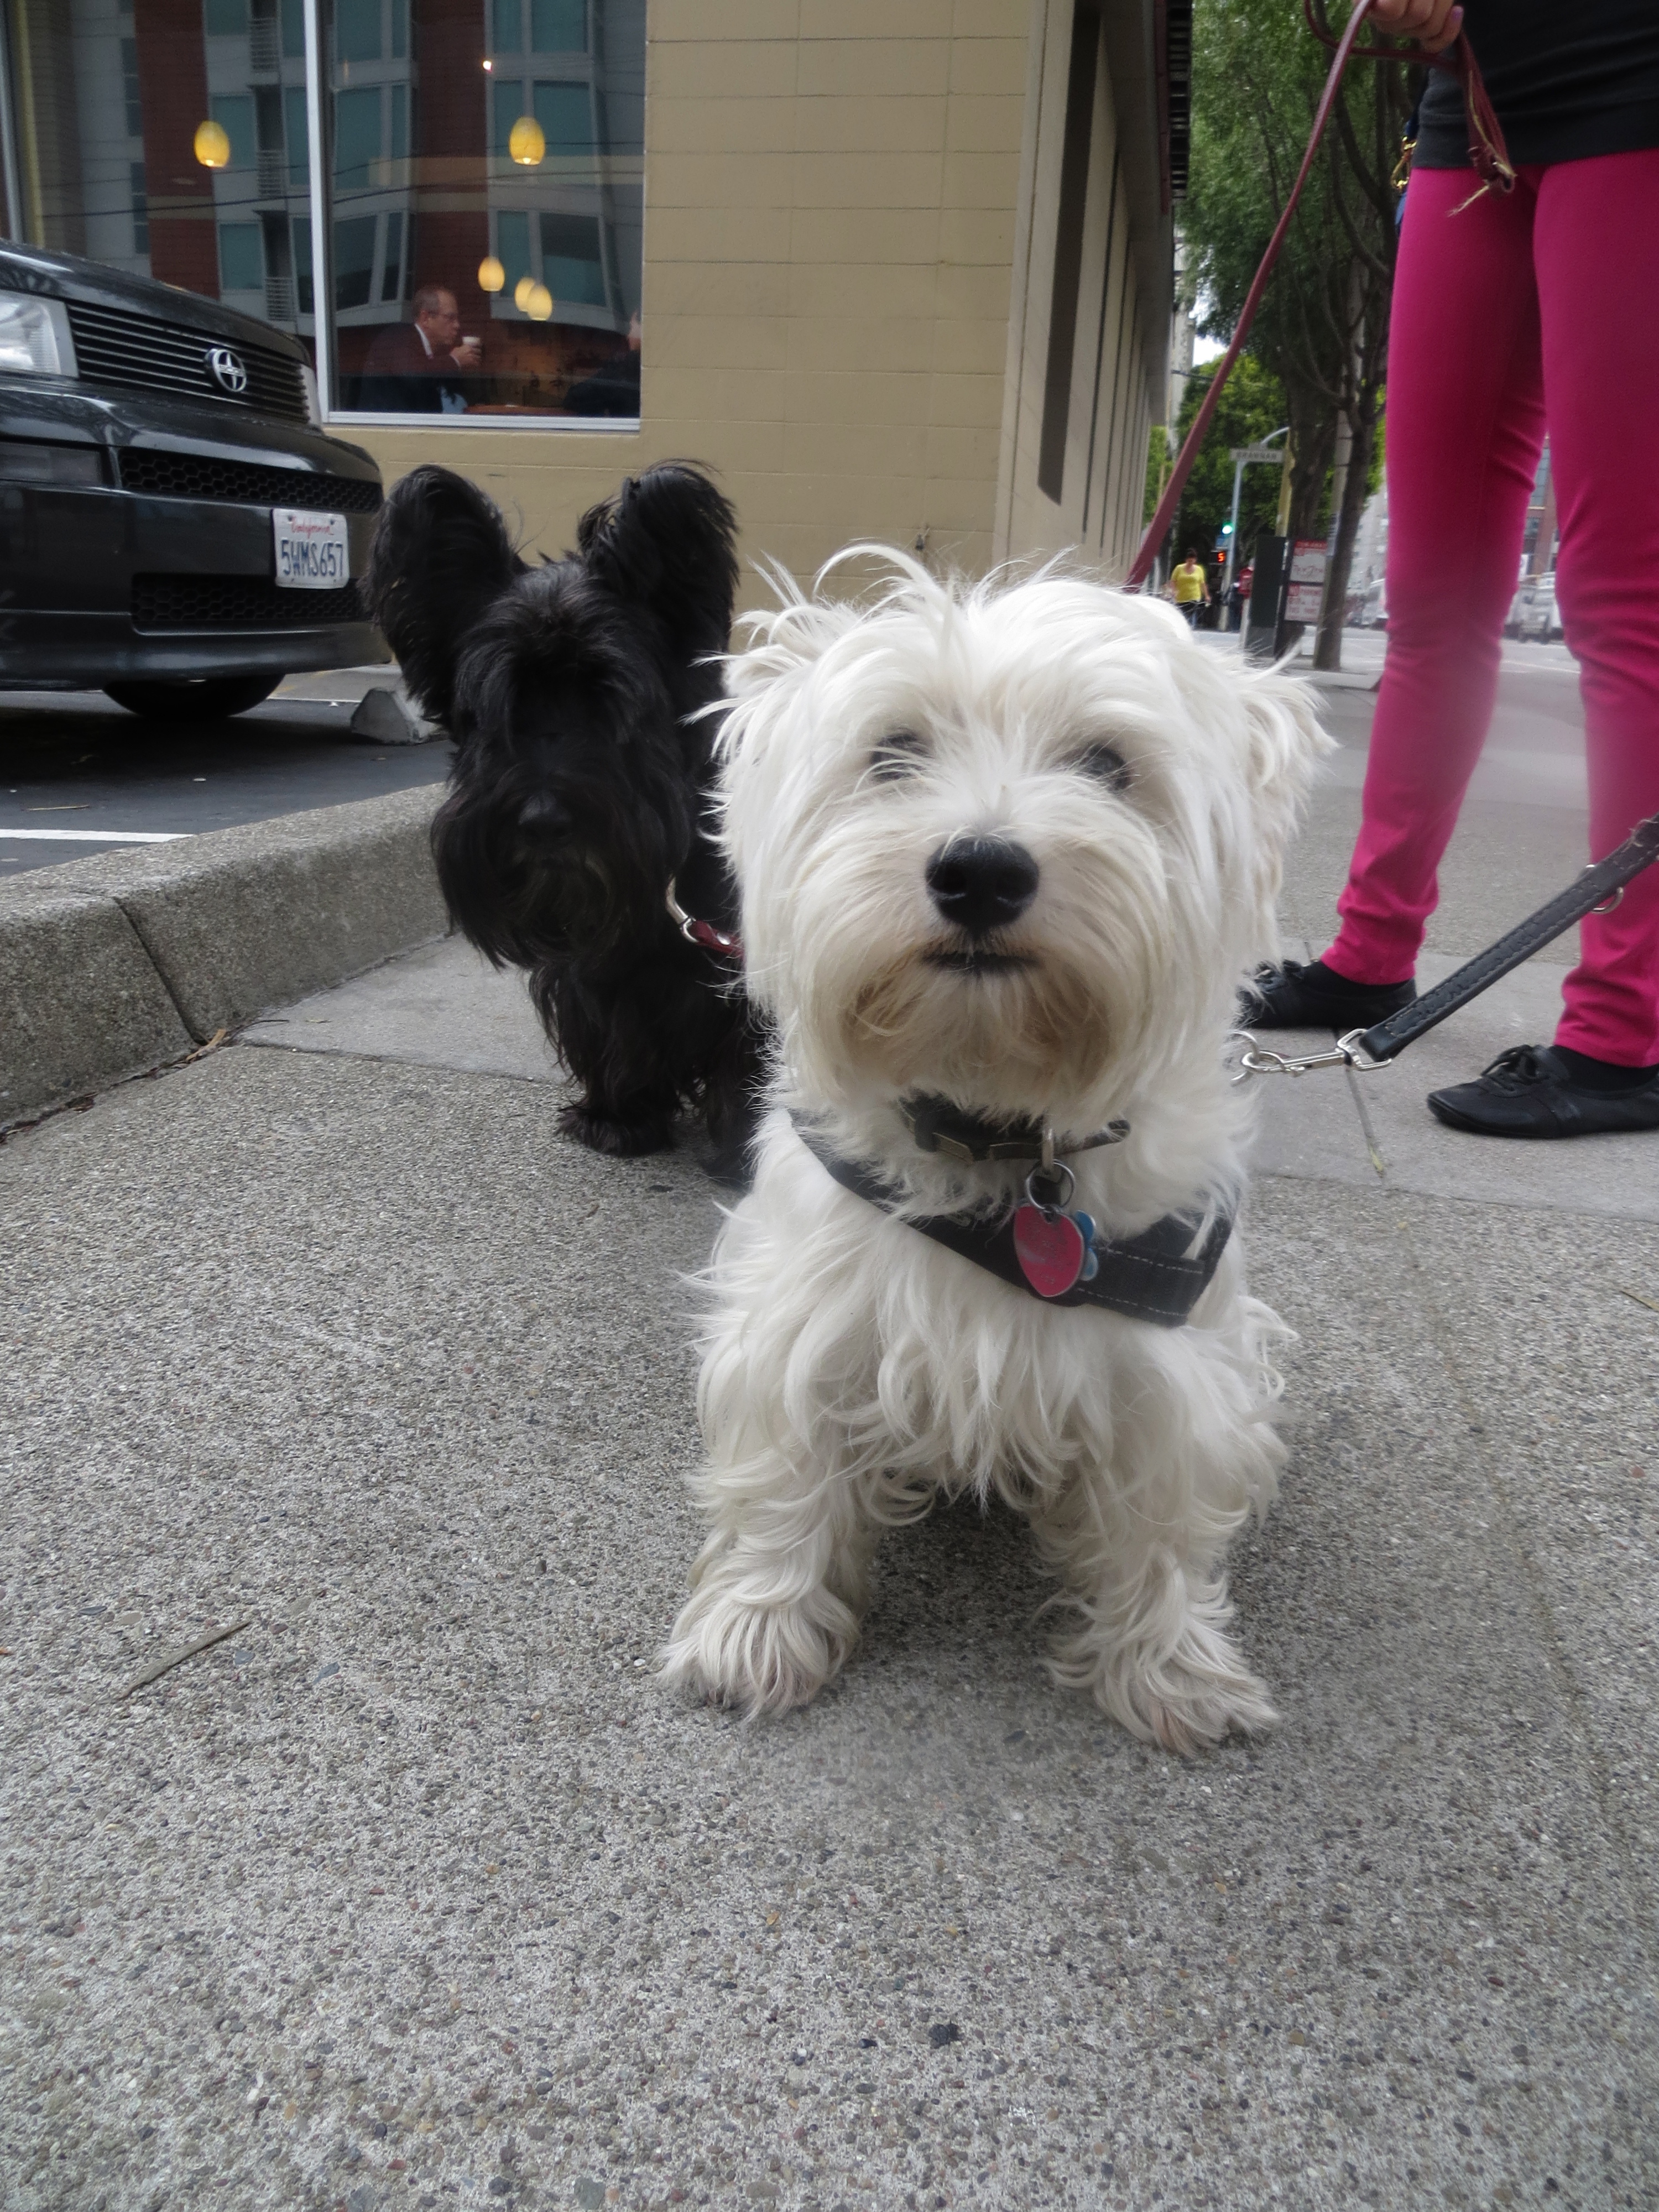 Scottish Terrier and West Highland White Terrier